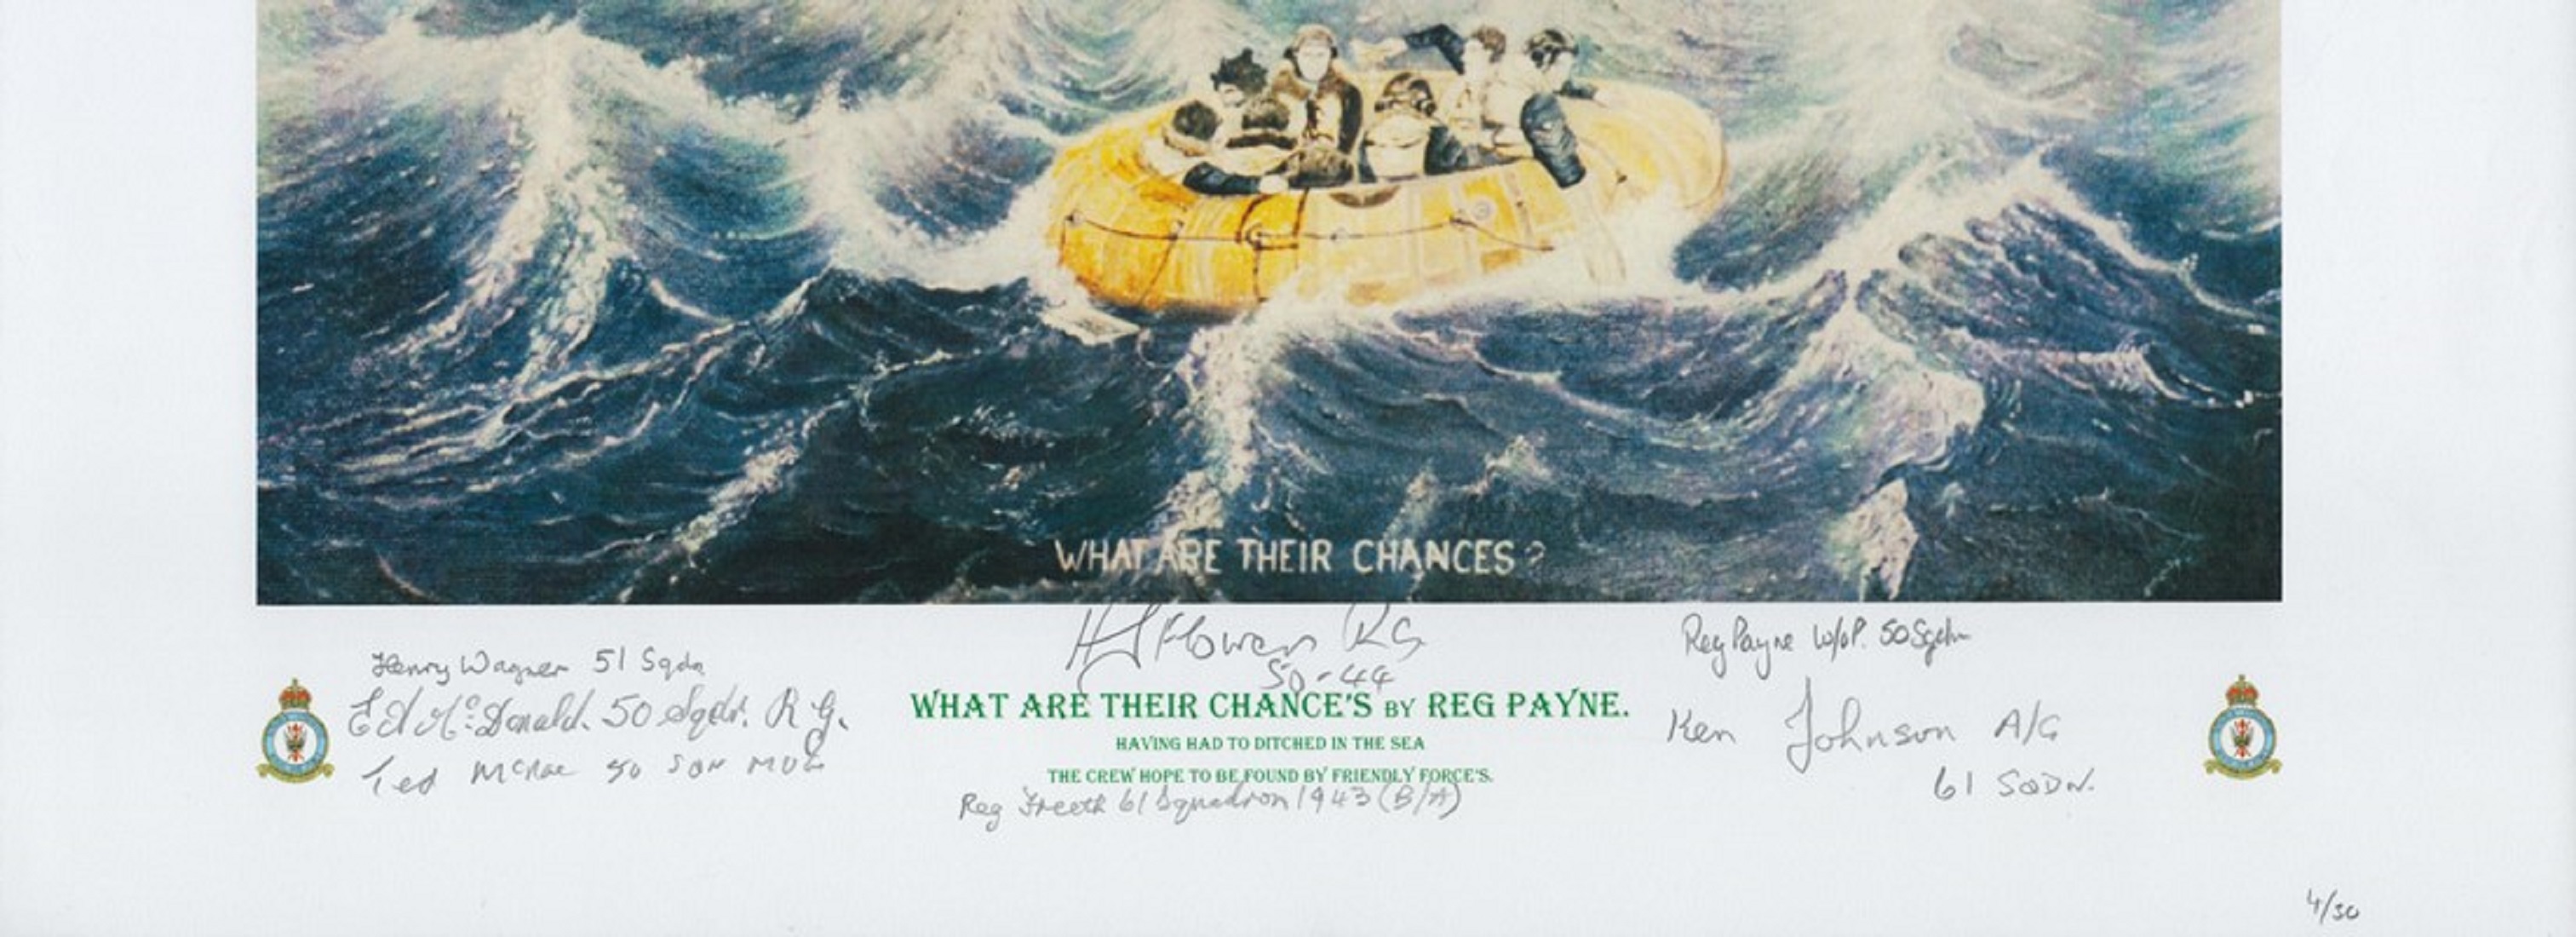 What are their chances print by Reg Payne. Signed by 6 Wagner, Mcdonald, Mcrae, Flowers, Freeth - Image 2 of 2